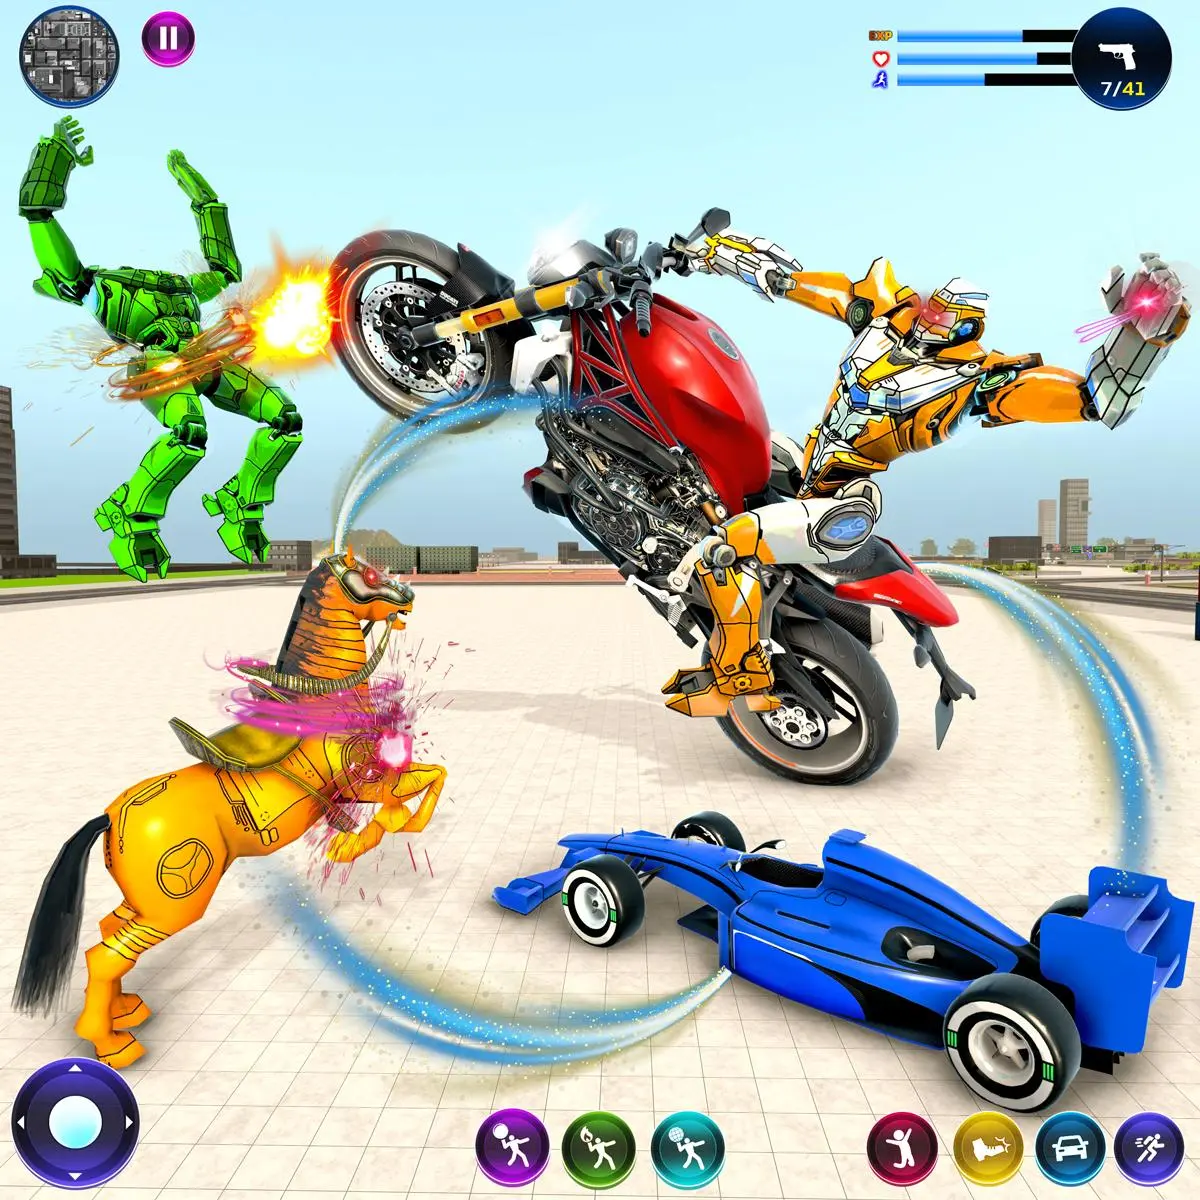 Download Bike Robot Games: Robot Game android on PC